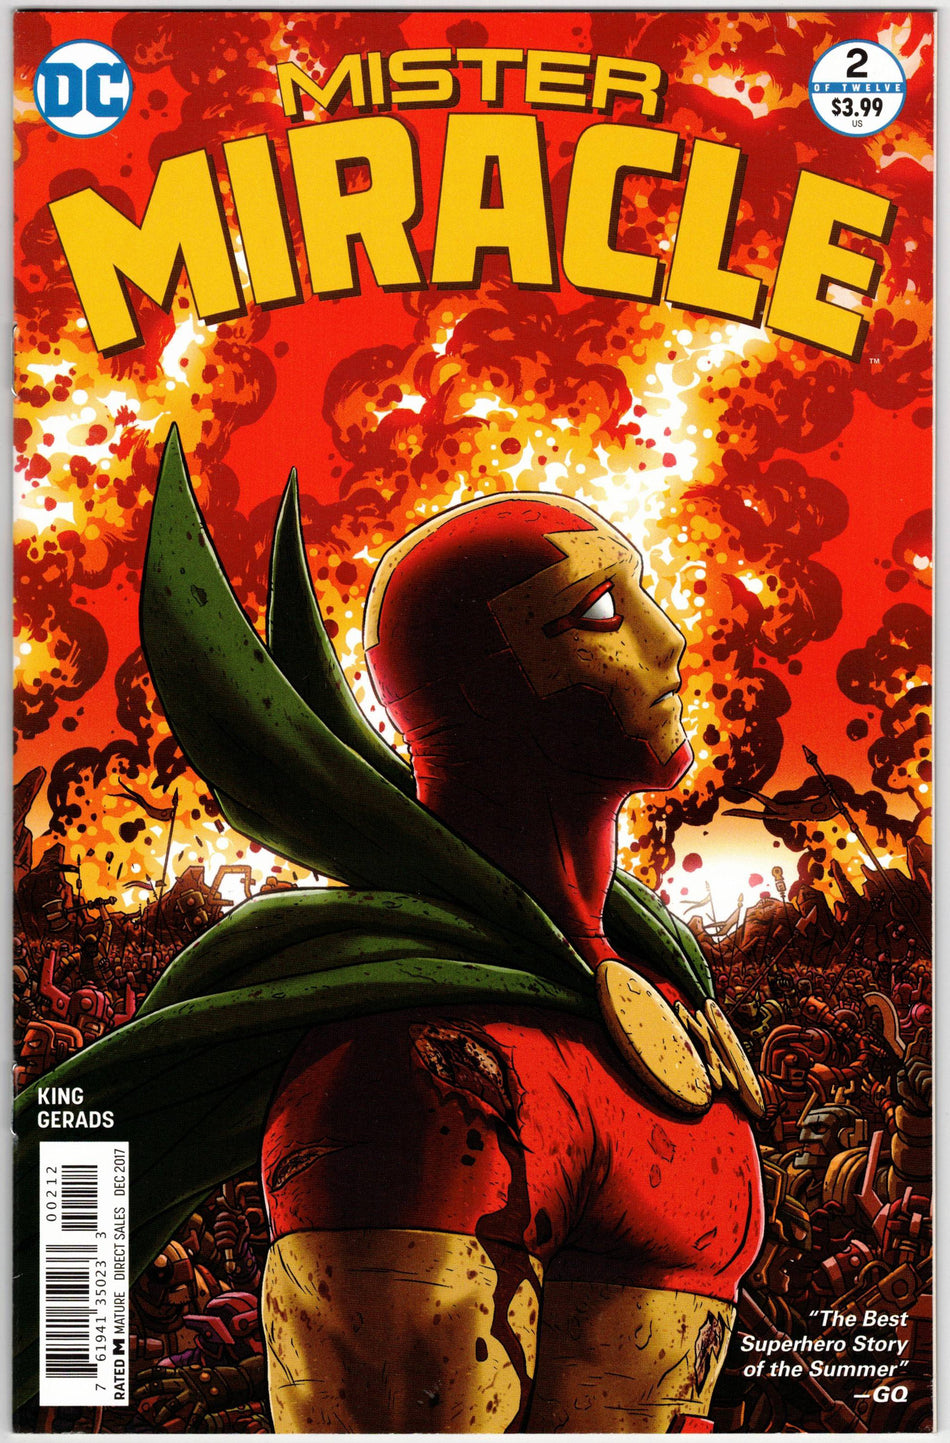 Photo of Mister Miracle, Vol. 4 (2017) Issue 2C - Near Mint Comic sold by Stronghold Collectibles